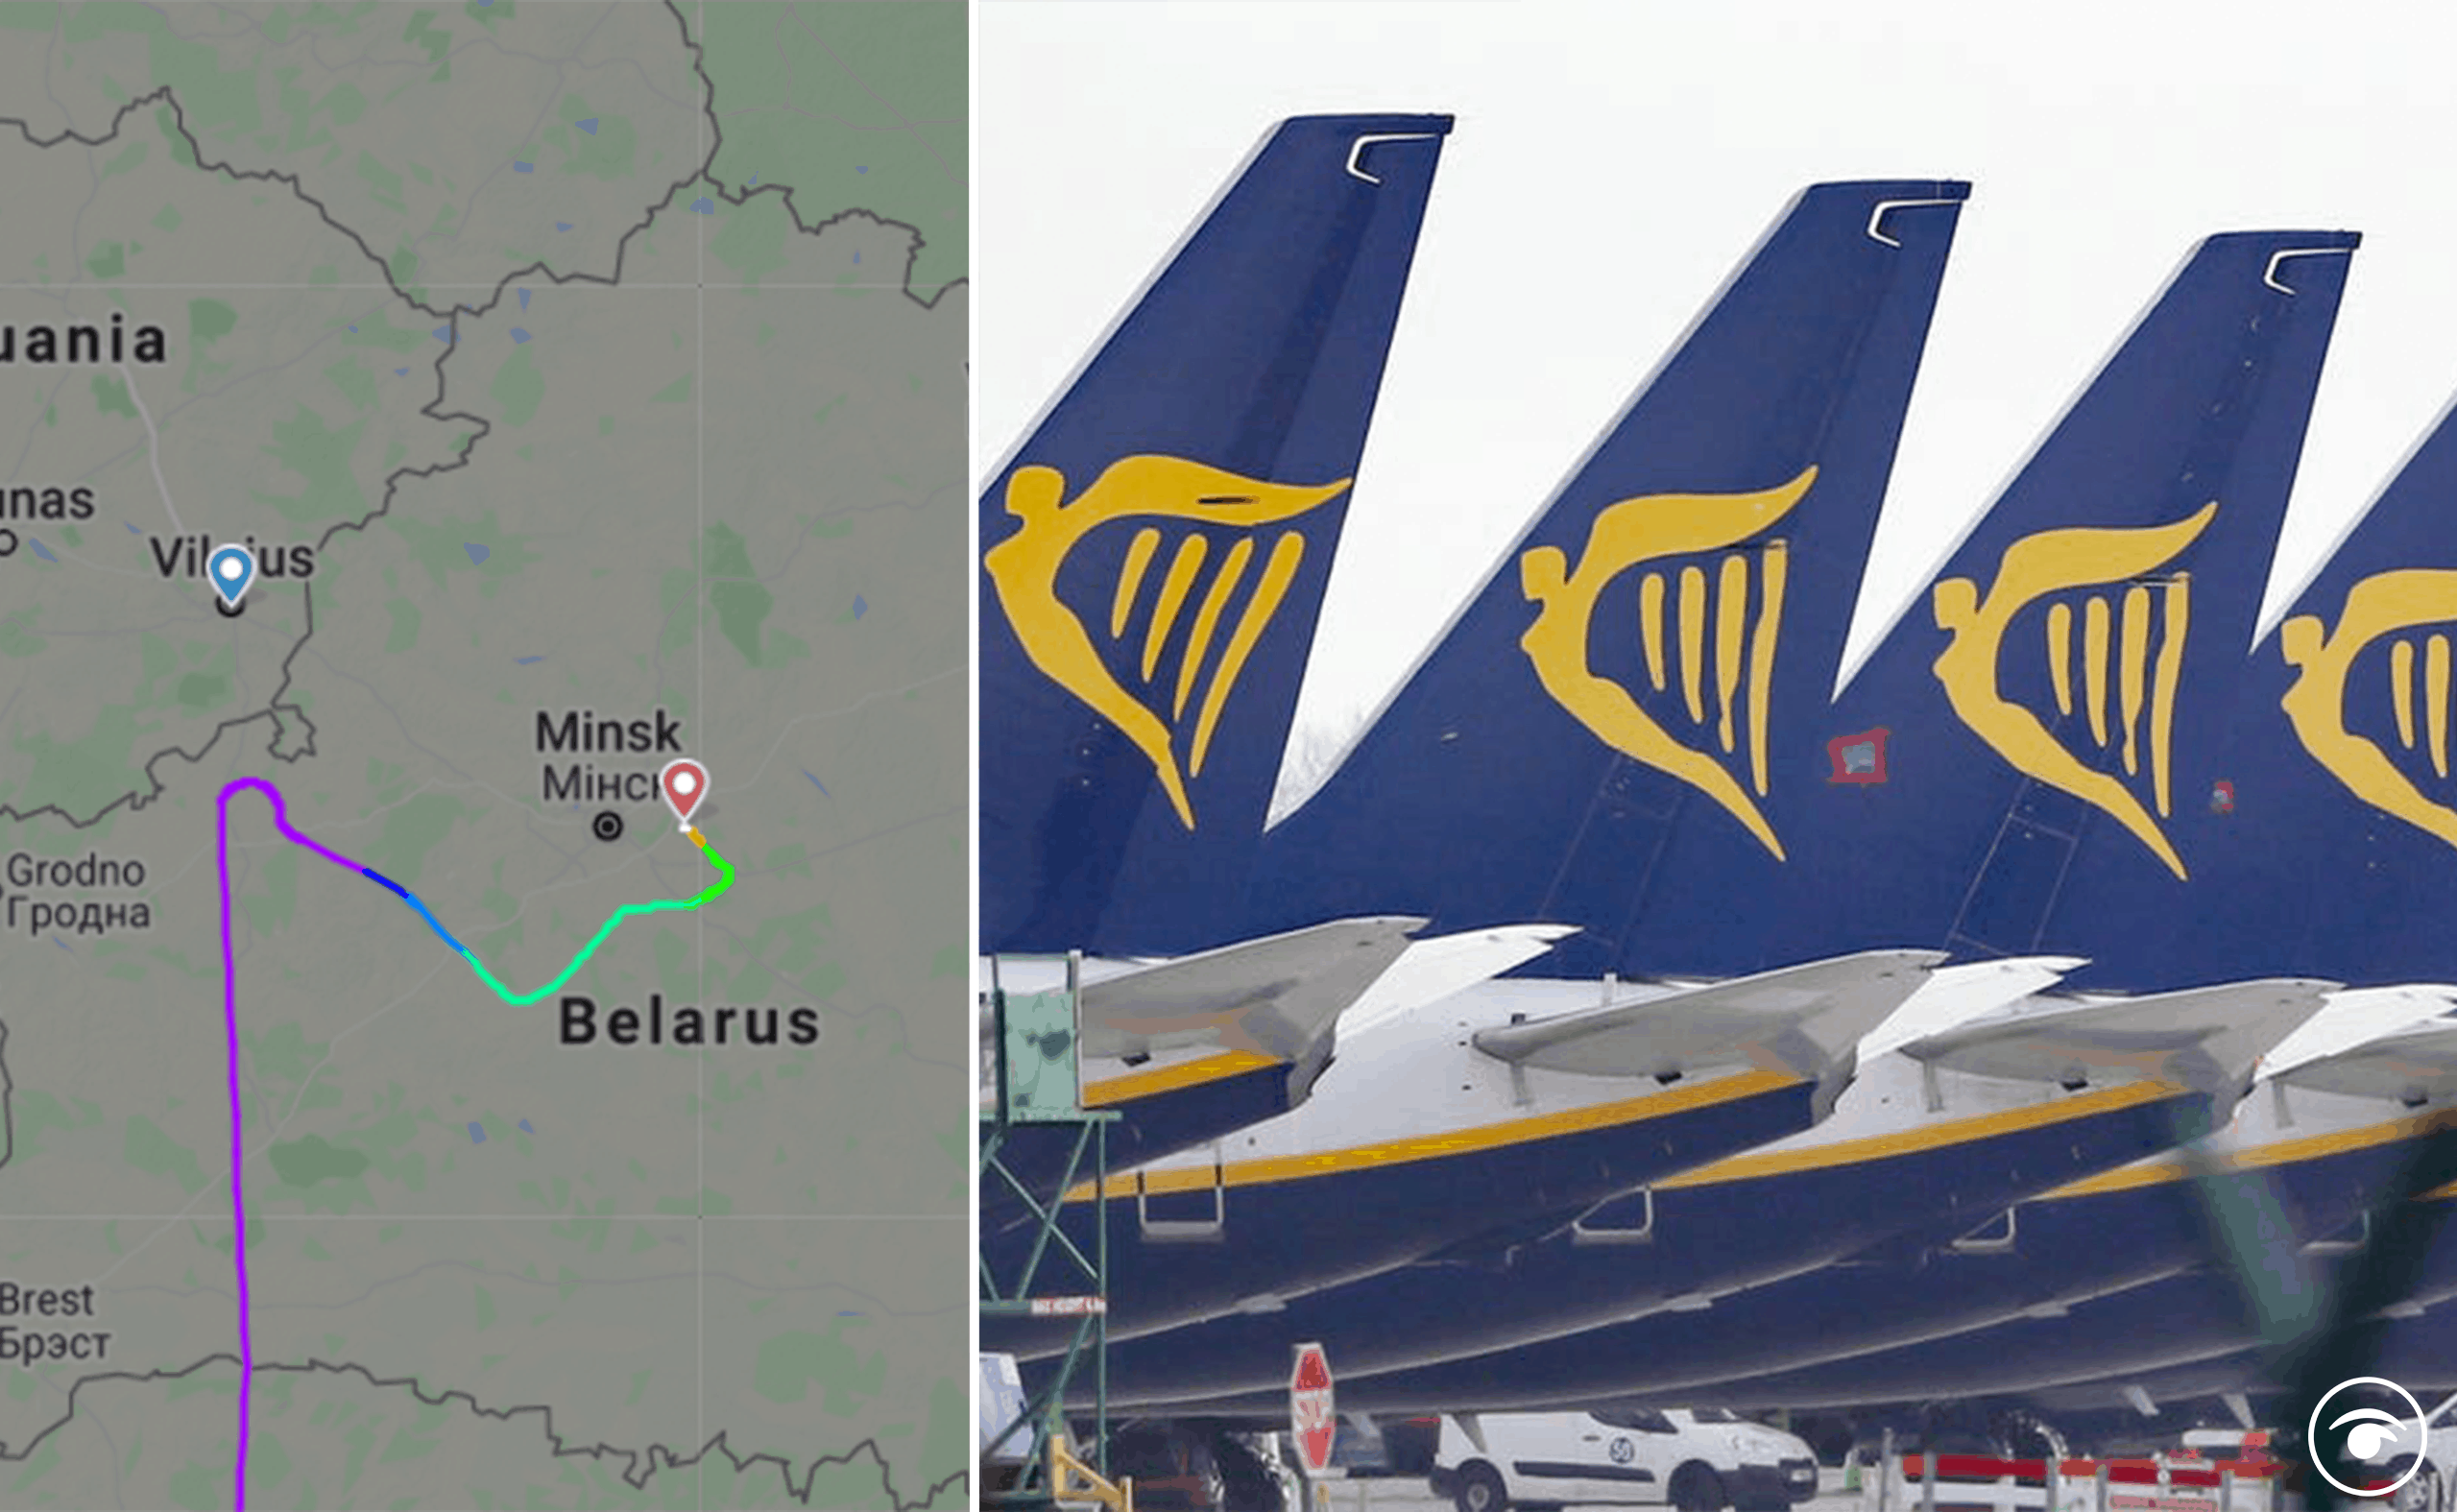 Just ‘look at the flight path’: Reaction as Ryanair flight diverted to Minsk